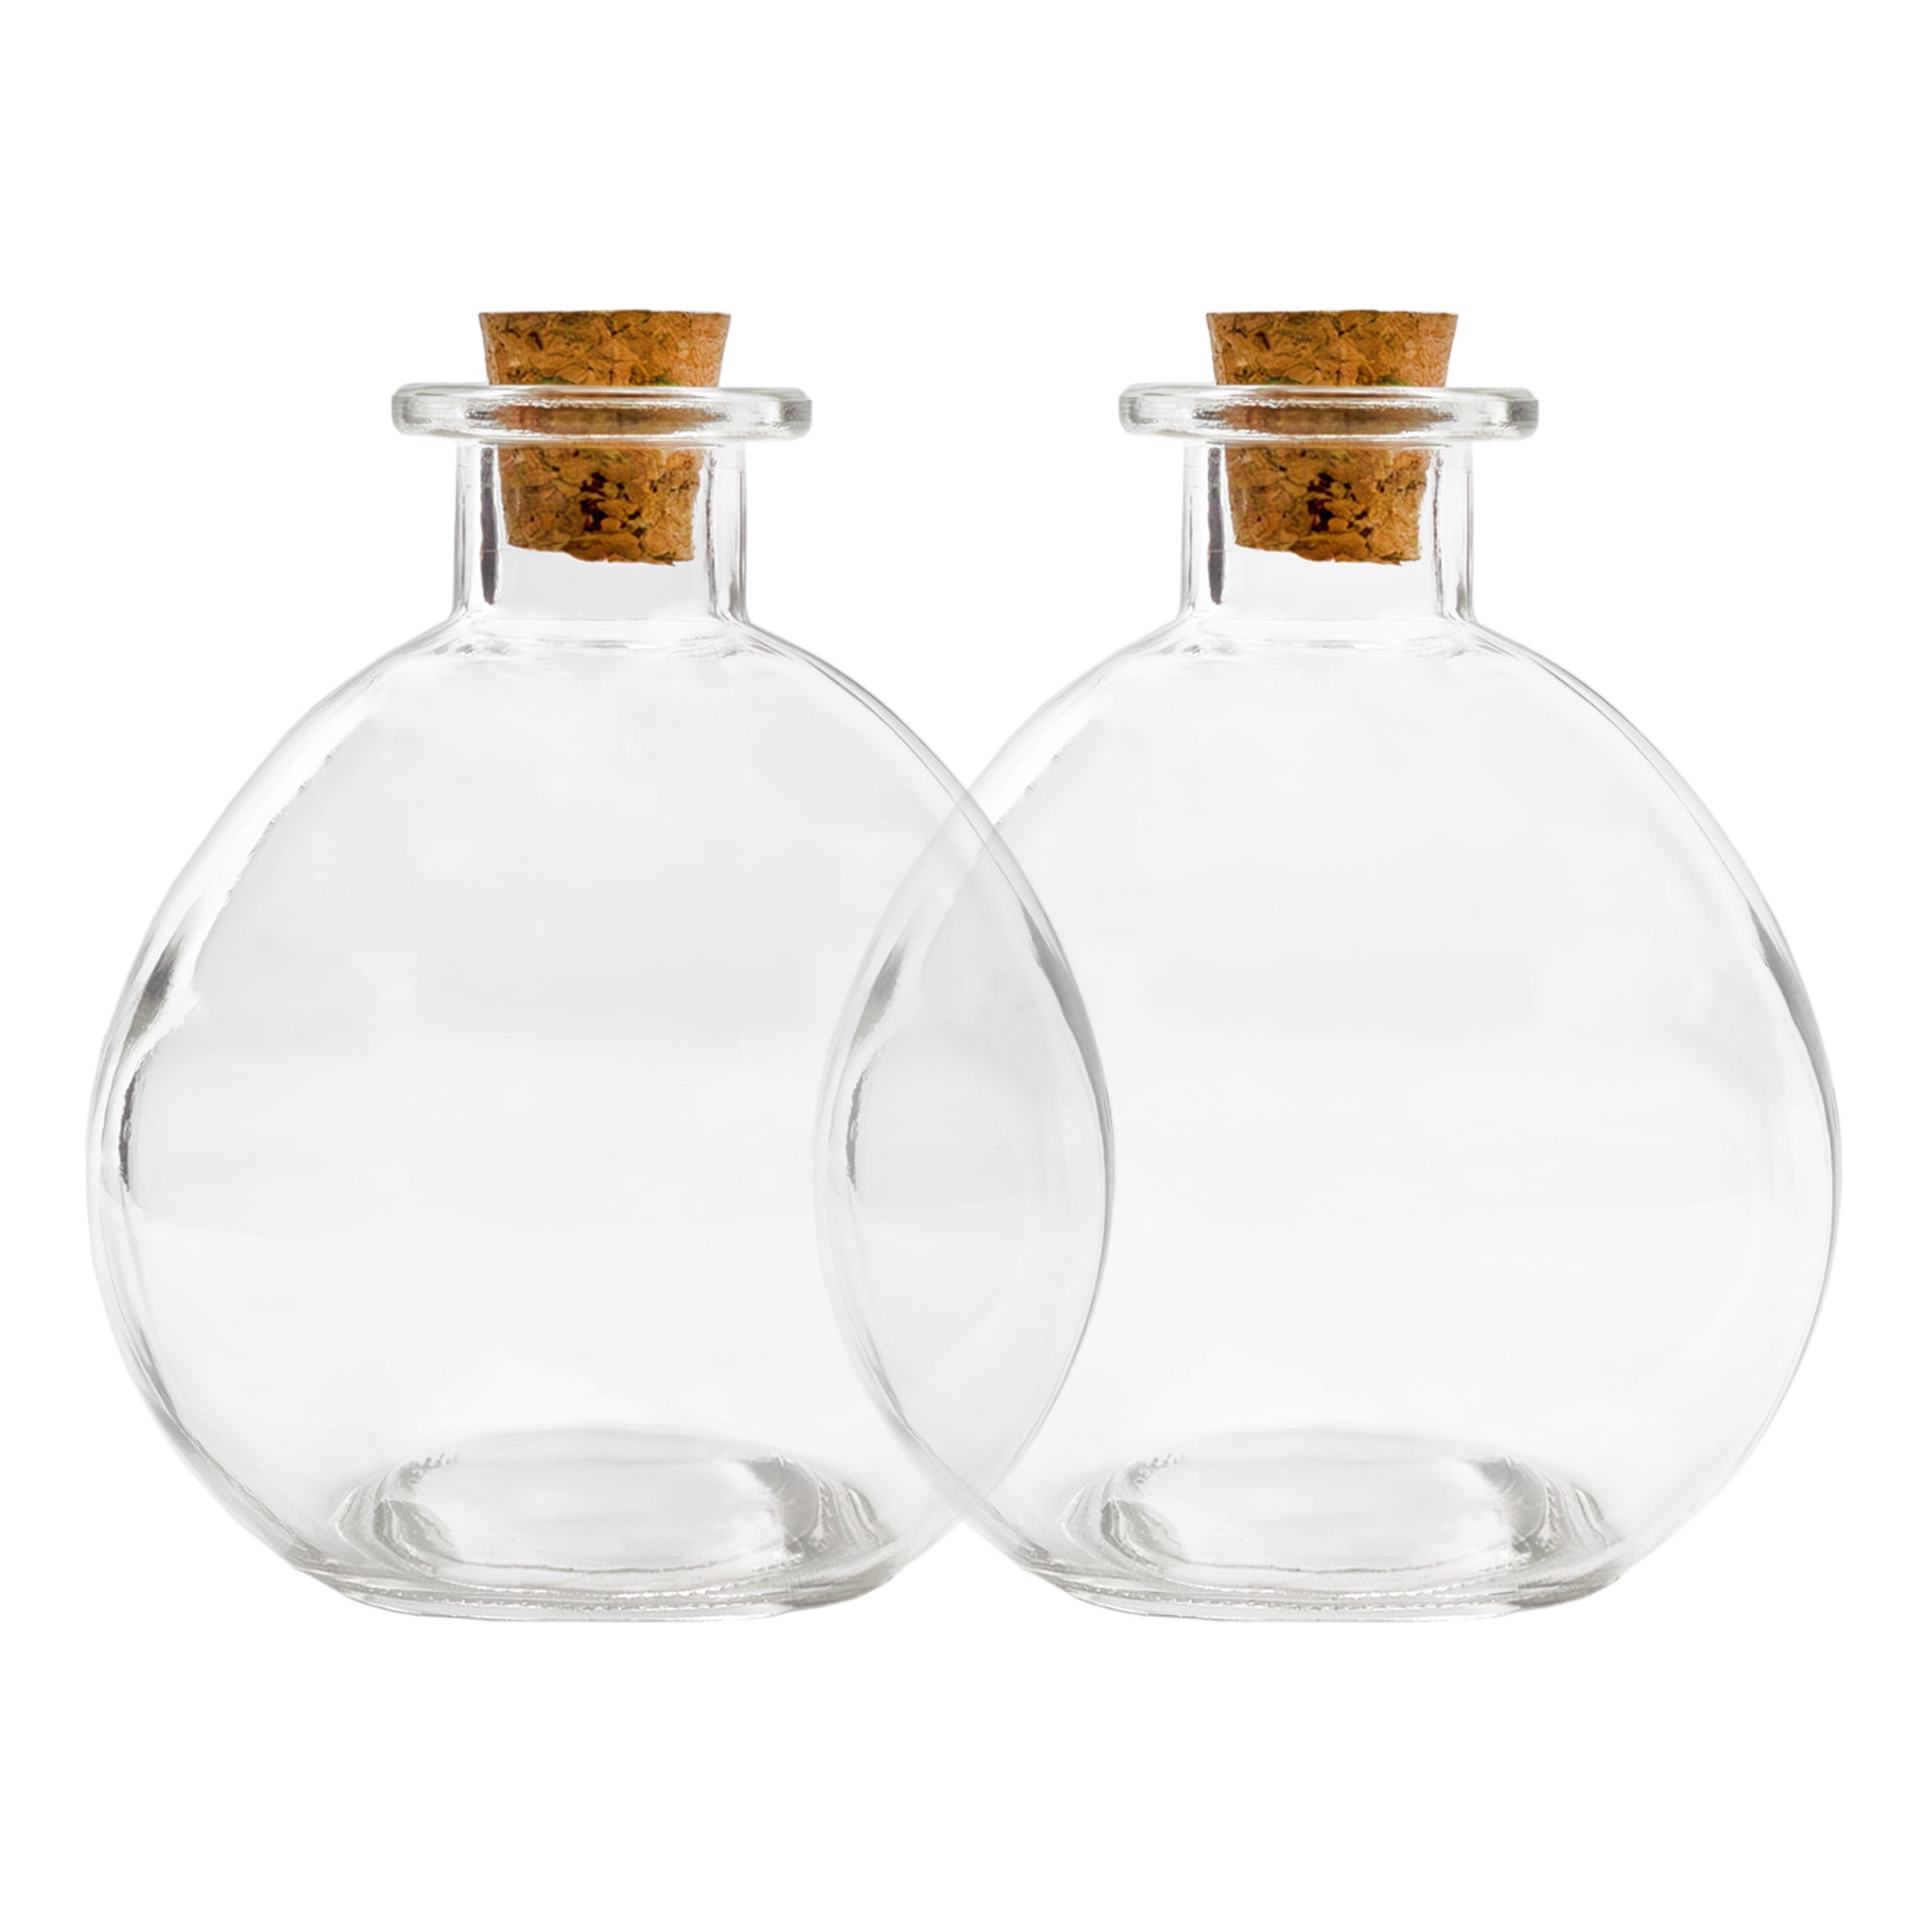 Cornucopia Round Glass Spherical Bottles, Potion Bottles with Corks  (2-Pack, 8-Ounce Capacity); Large Bottles for Costume Props, Decor & DIY  Crafts